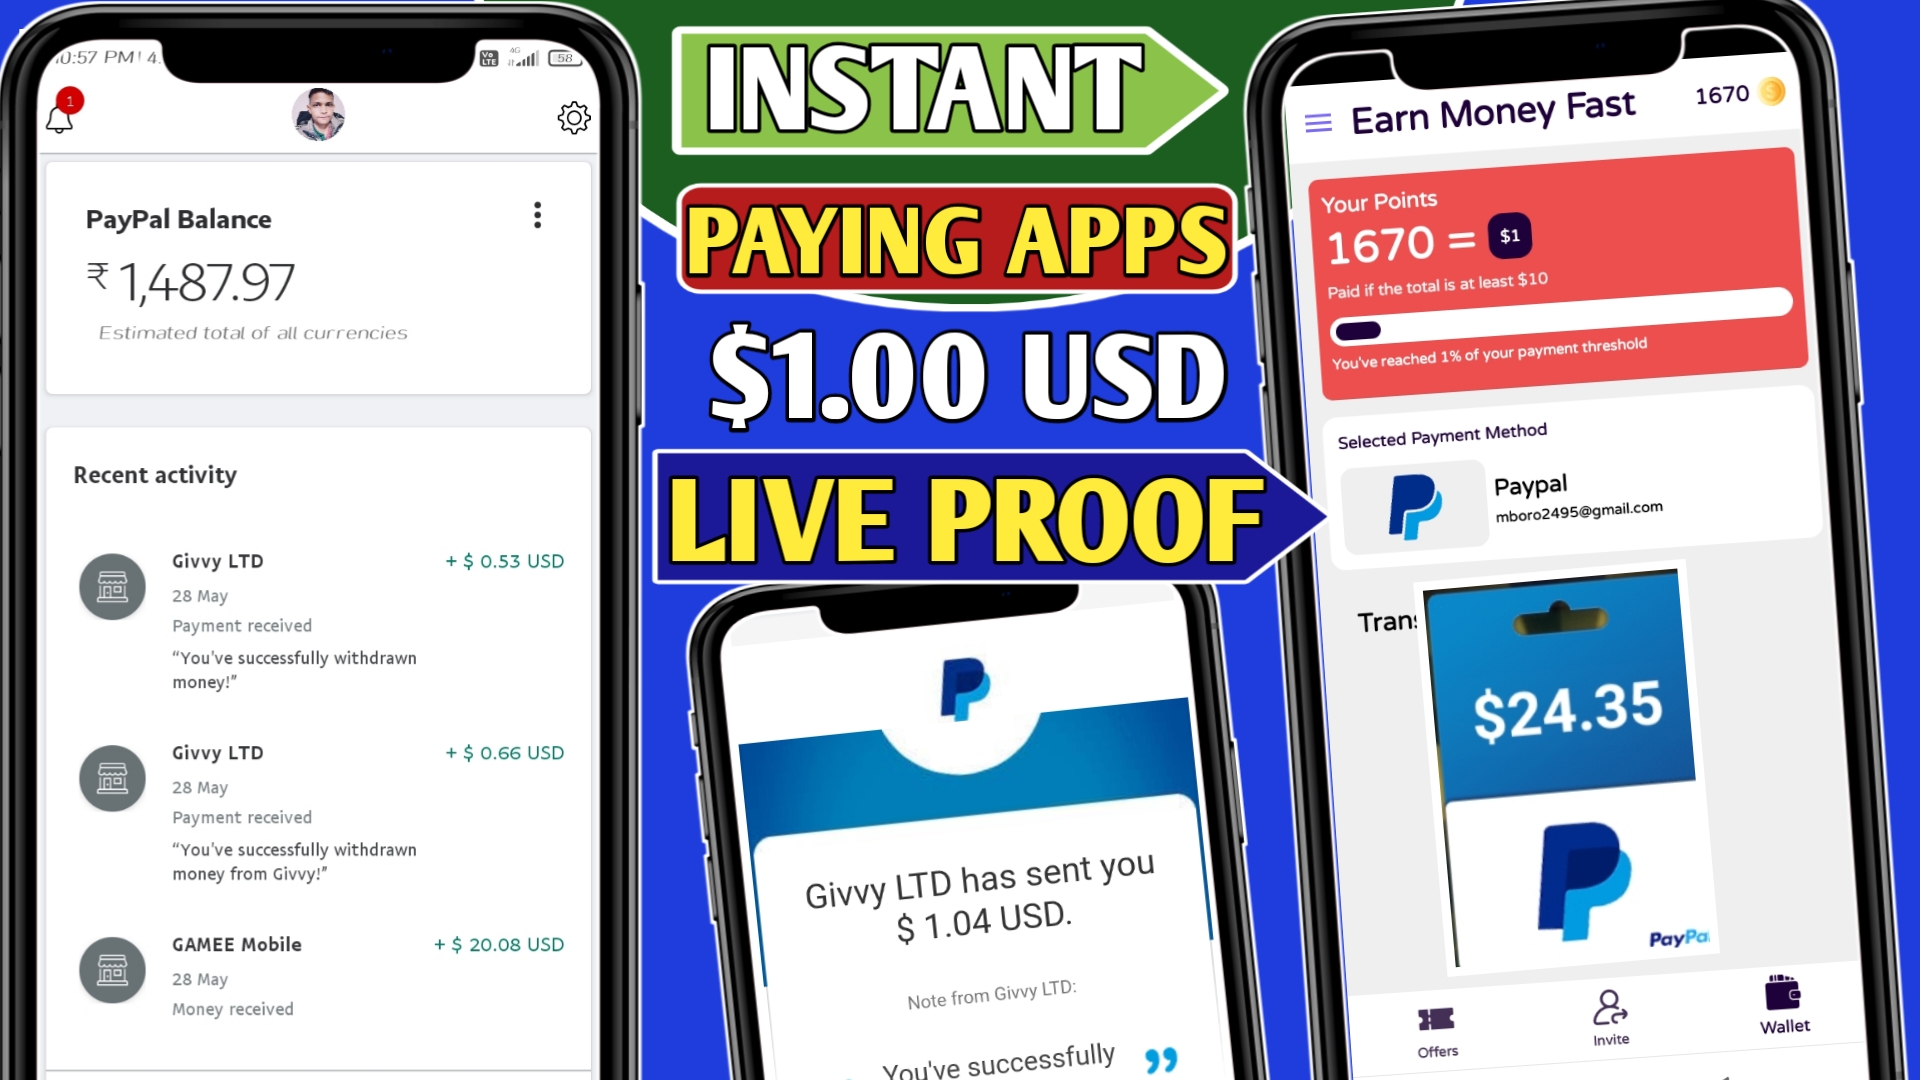 Instant Paying Apps With Payment Proof